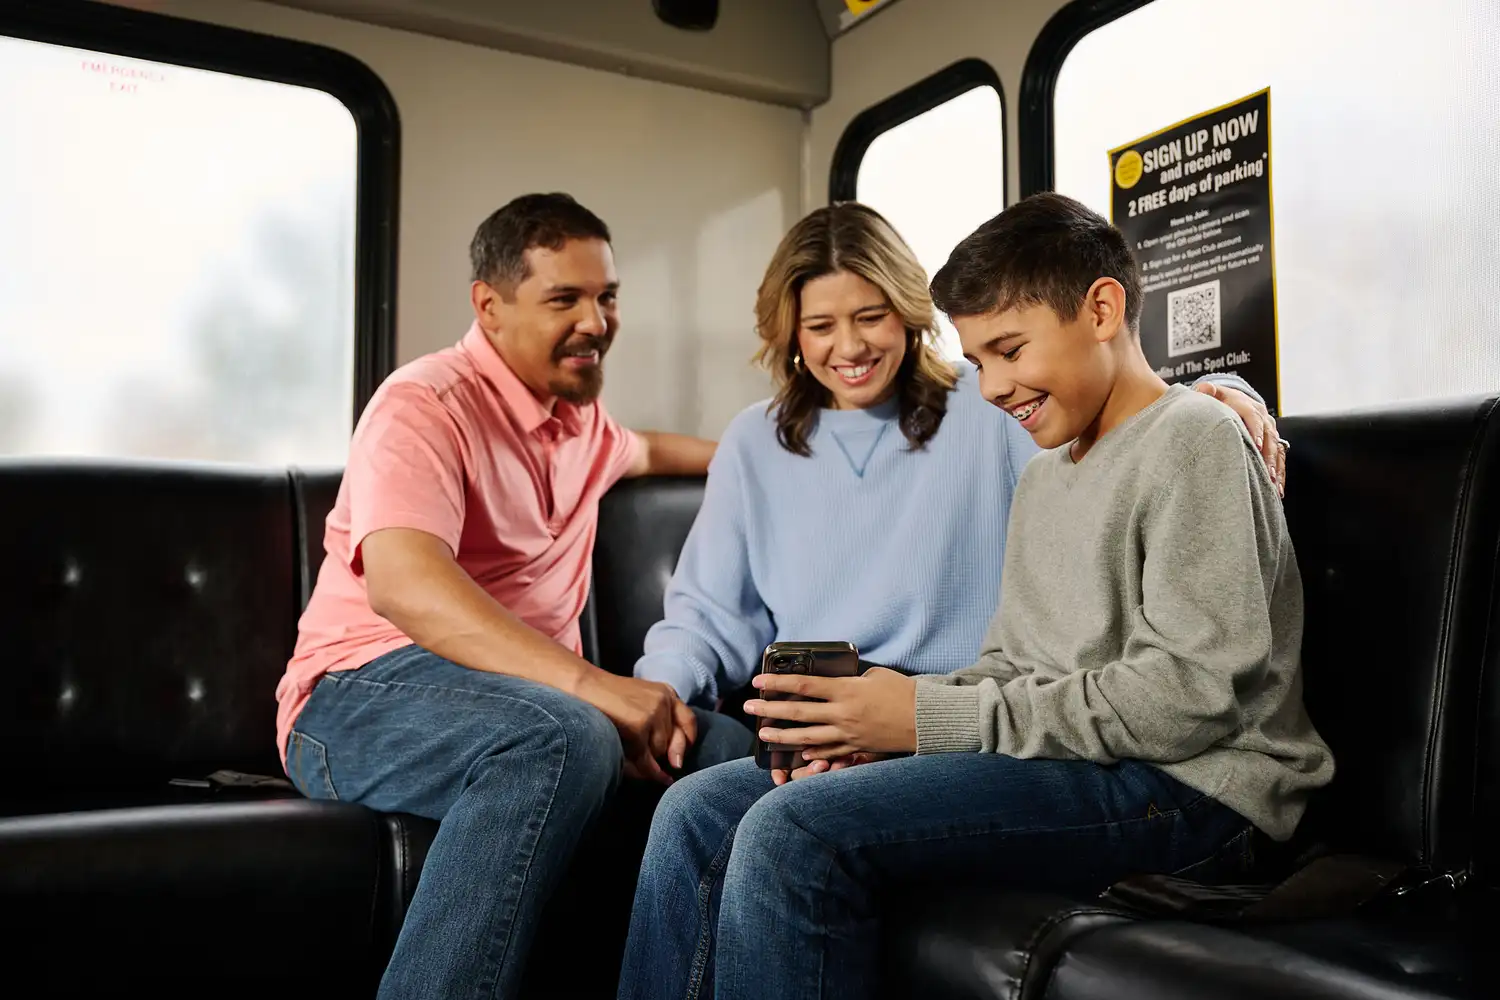 A family of three inside an Airport Shuttle checks in on a mobile device.